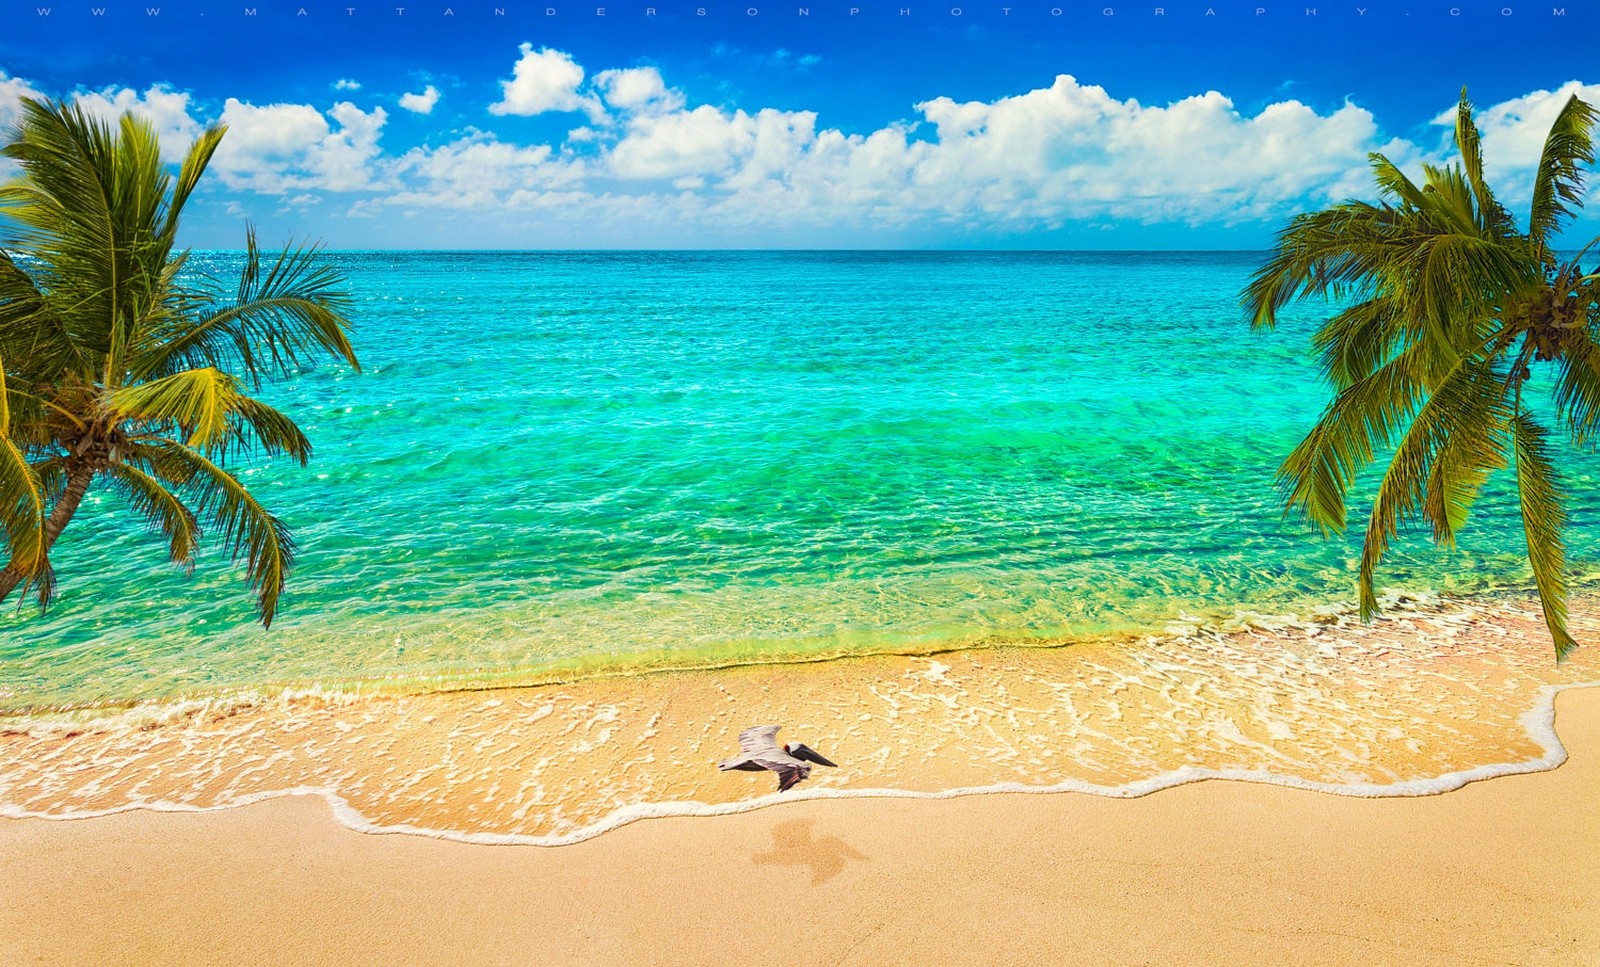 General 1600x967 nature sand beach sea palm trees birds flying clouds tropical Caribbean summer